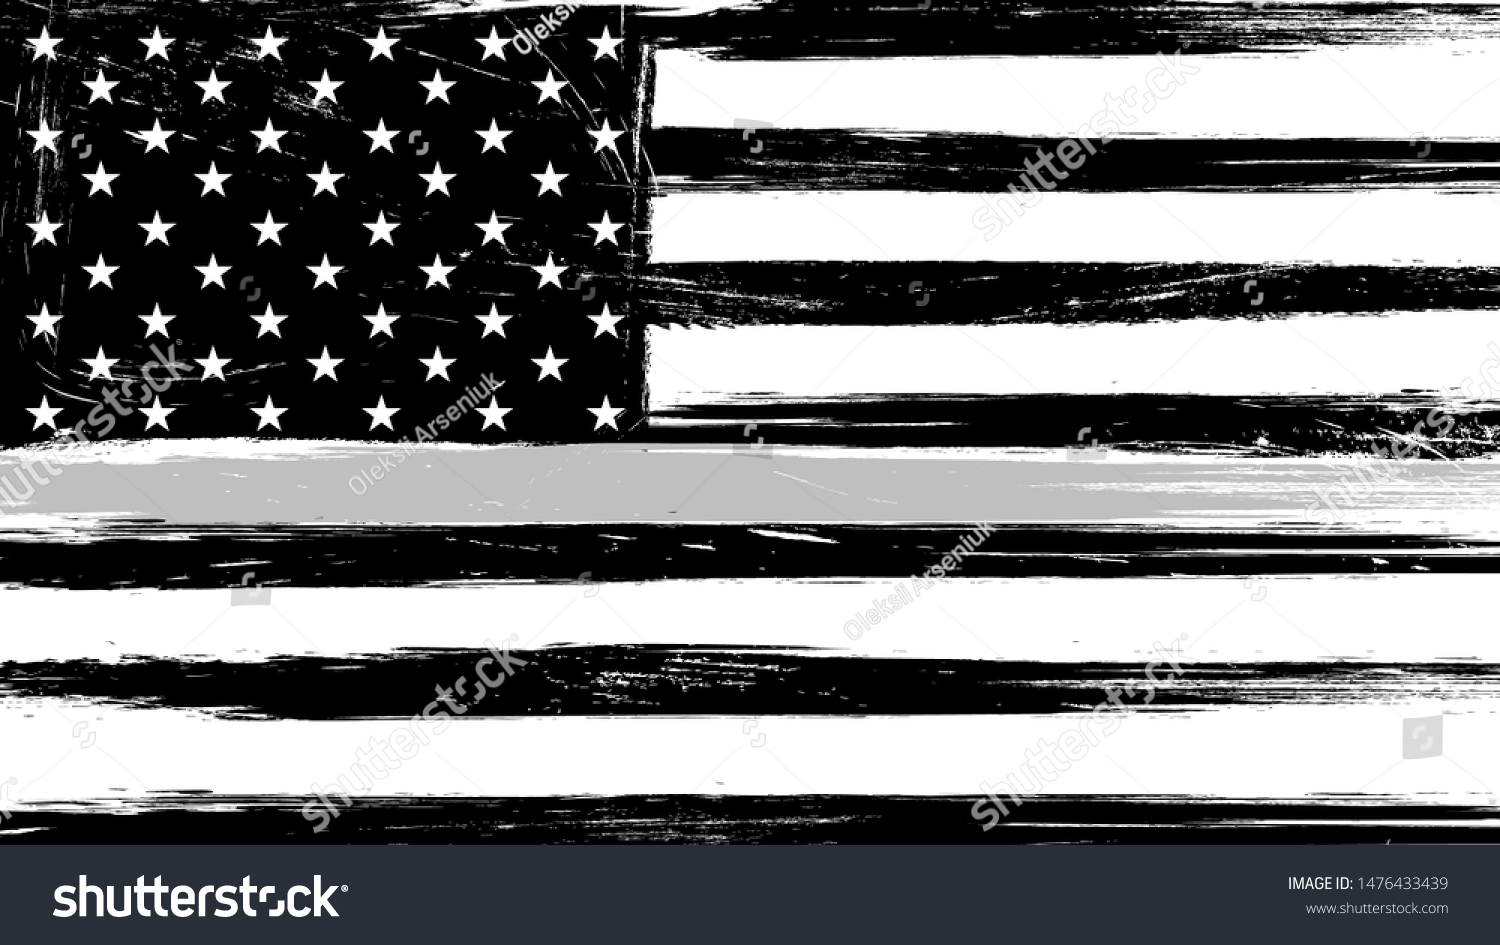 SVG of Grunge USA flag with a thin gray or silver line - a sign to honor and respect american correctional officers, prison guards and jailers svg